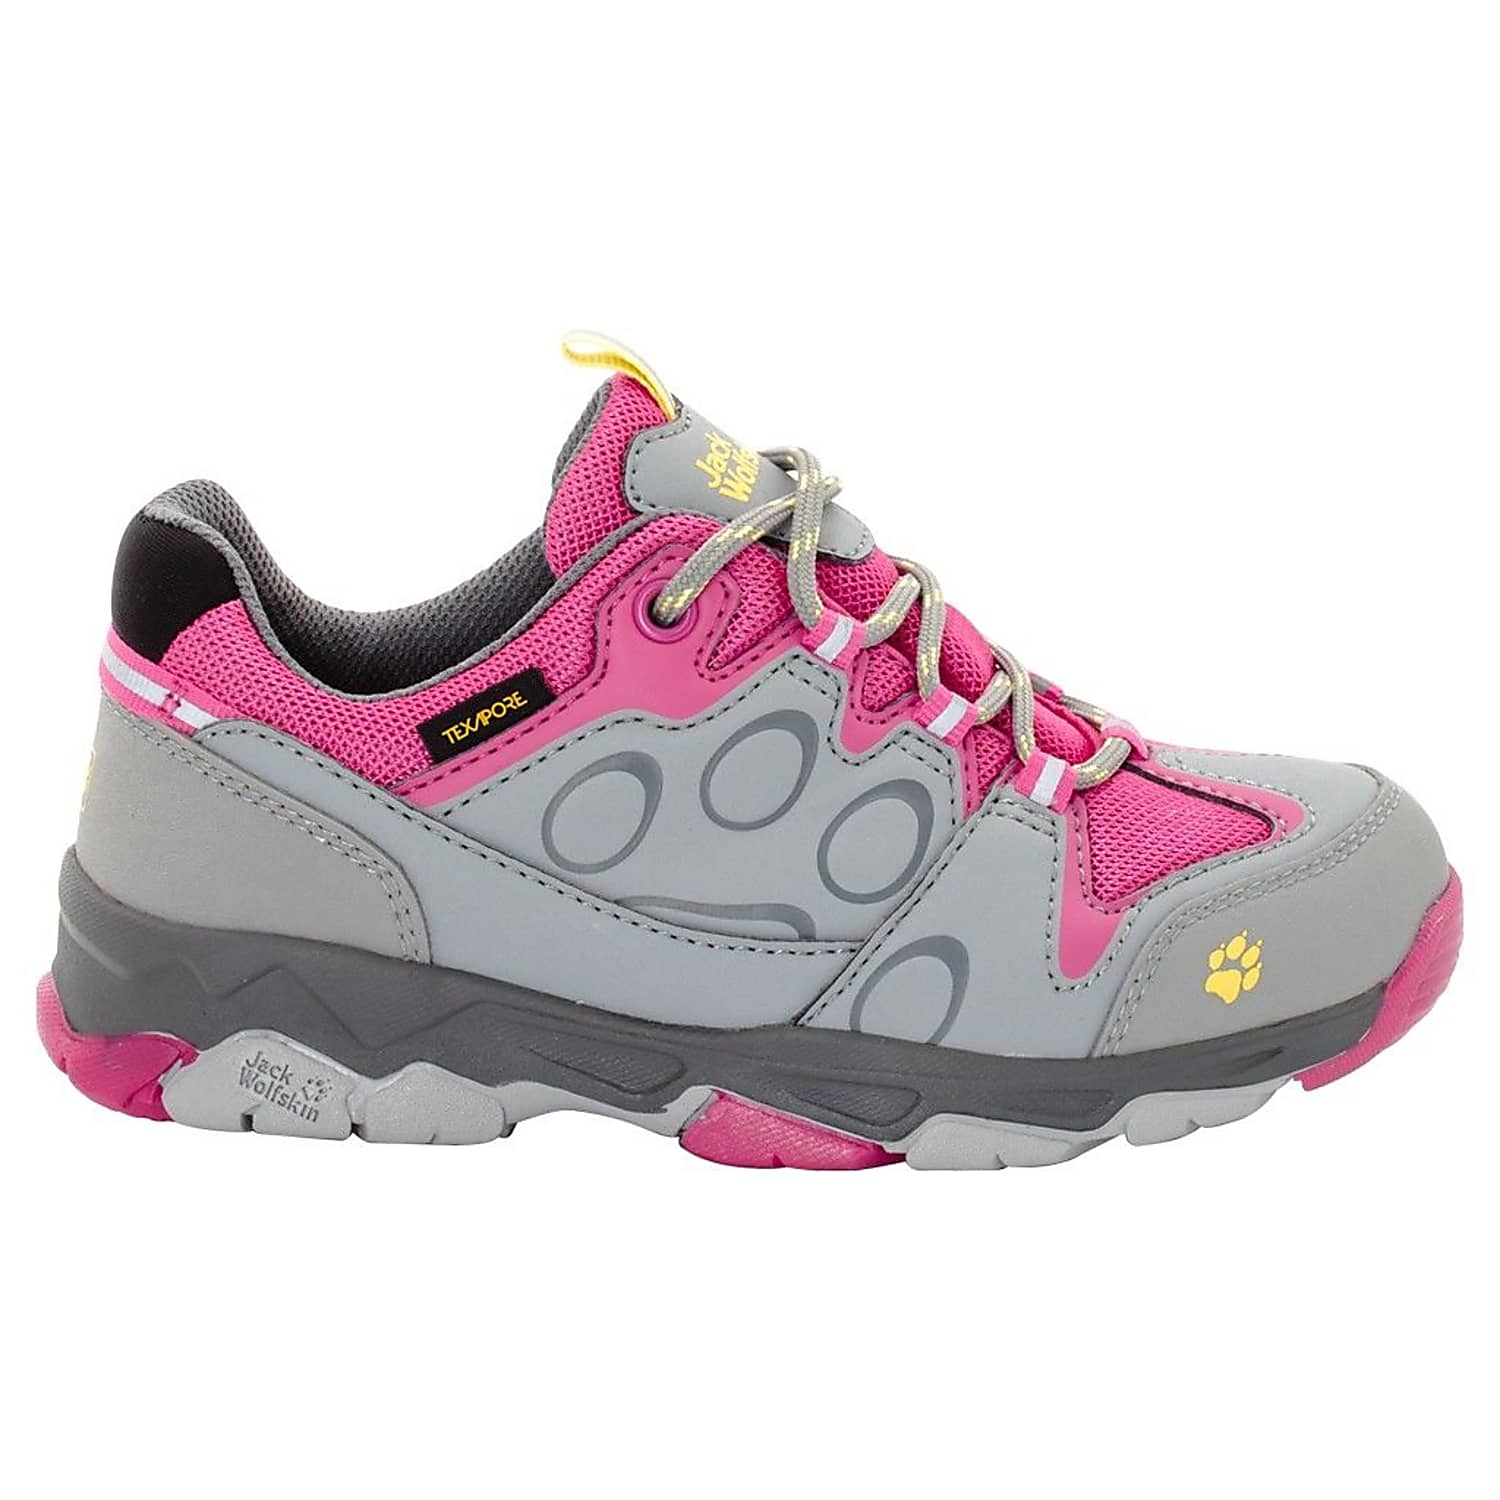 Jack Wolfskin KIDS MTN ATTACK Tropic TEXAPORE cheap - and shipping Pink LOW, 2 Fast